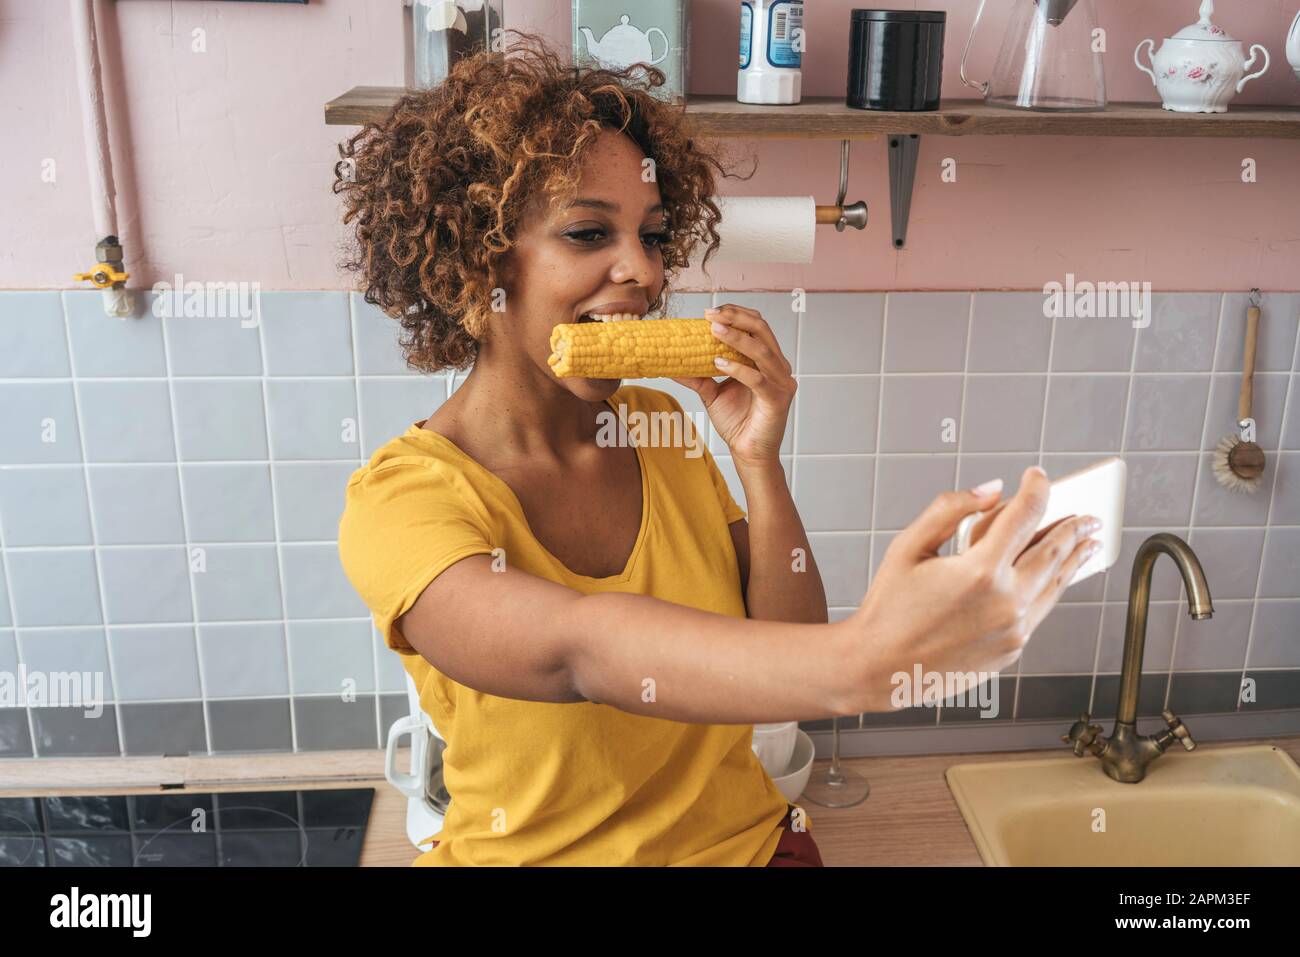 Young woman eating a corncob and taking a selfie in kitchen Stock Photo